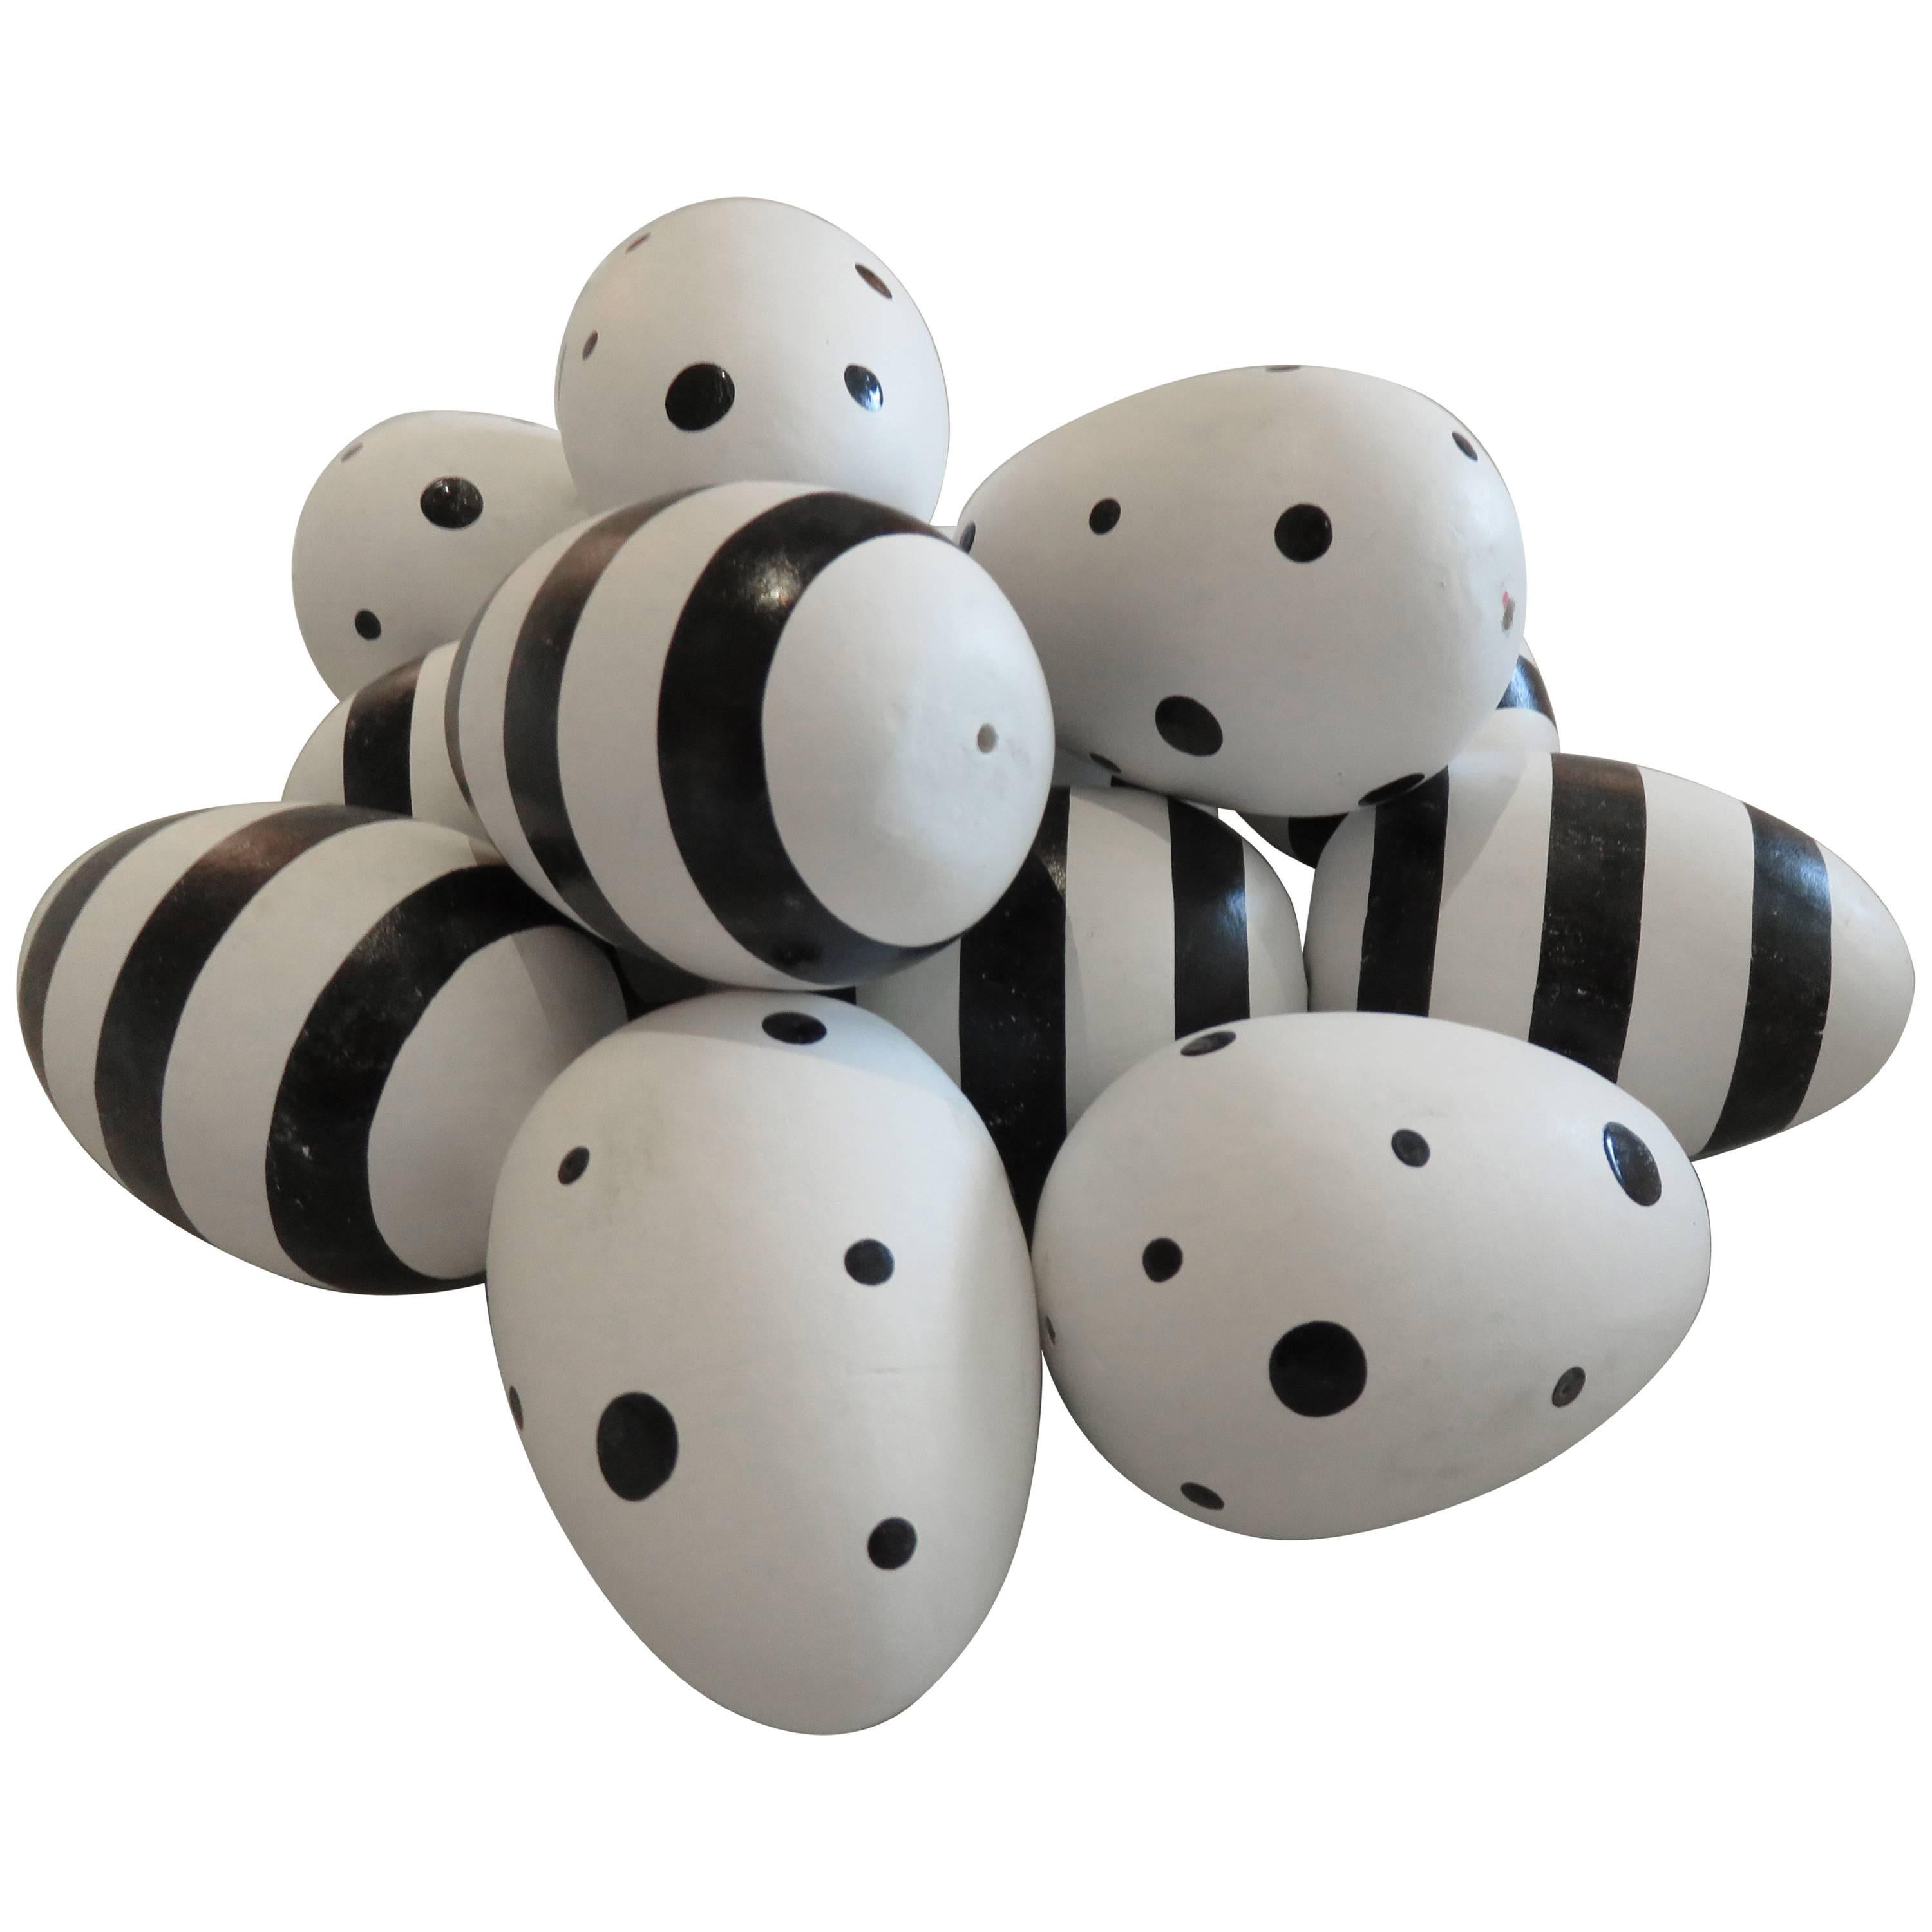 Black and White Decorated Geoffrey Beene Ceramic Eggs, 1980s